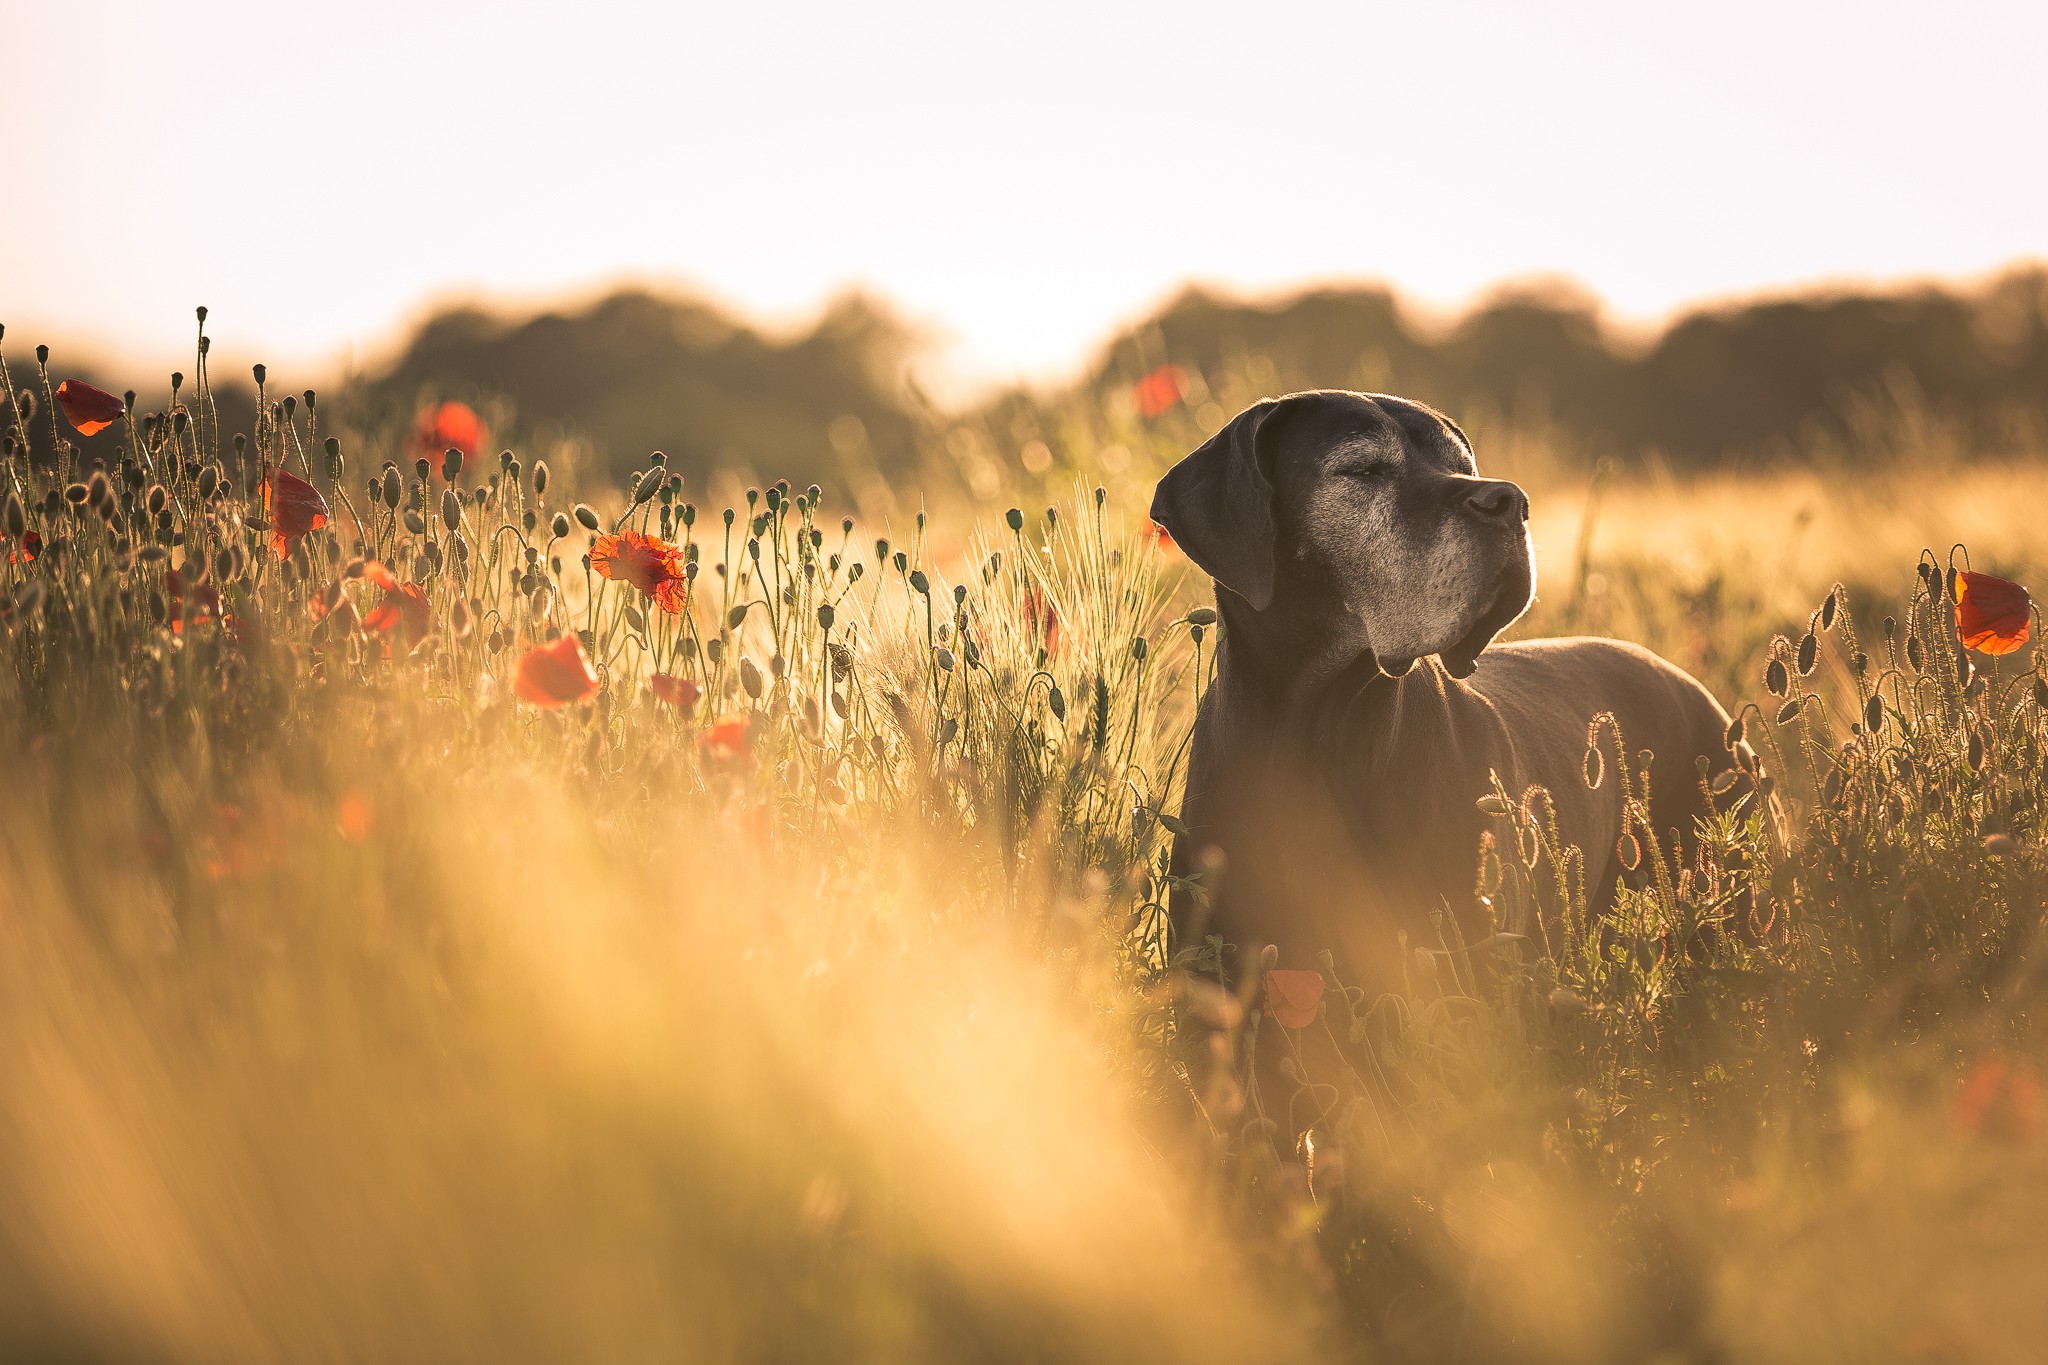 General 2048x1365 dog field flowers poppies red flowers depth of field animals mammals outdoors plants